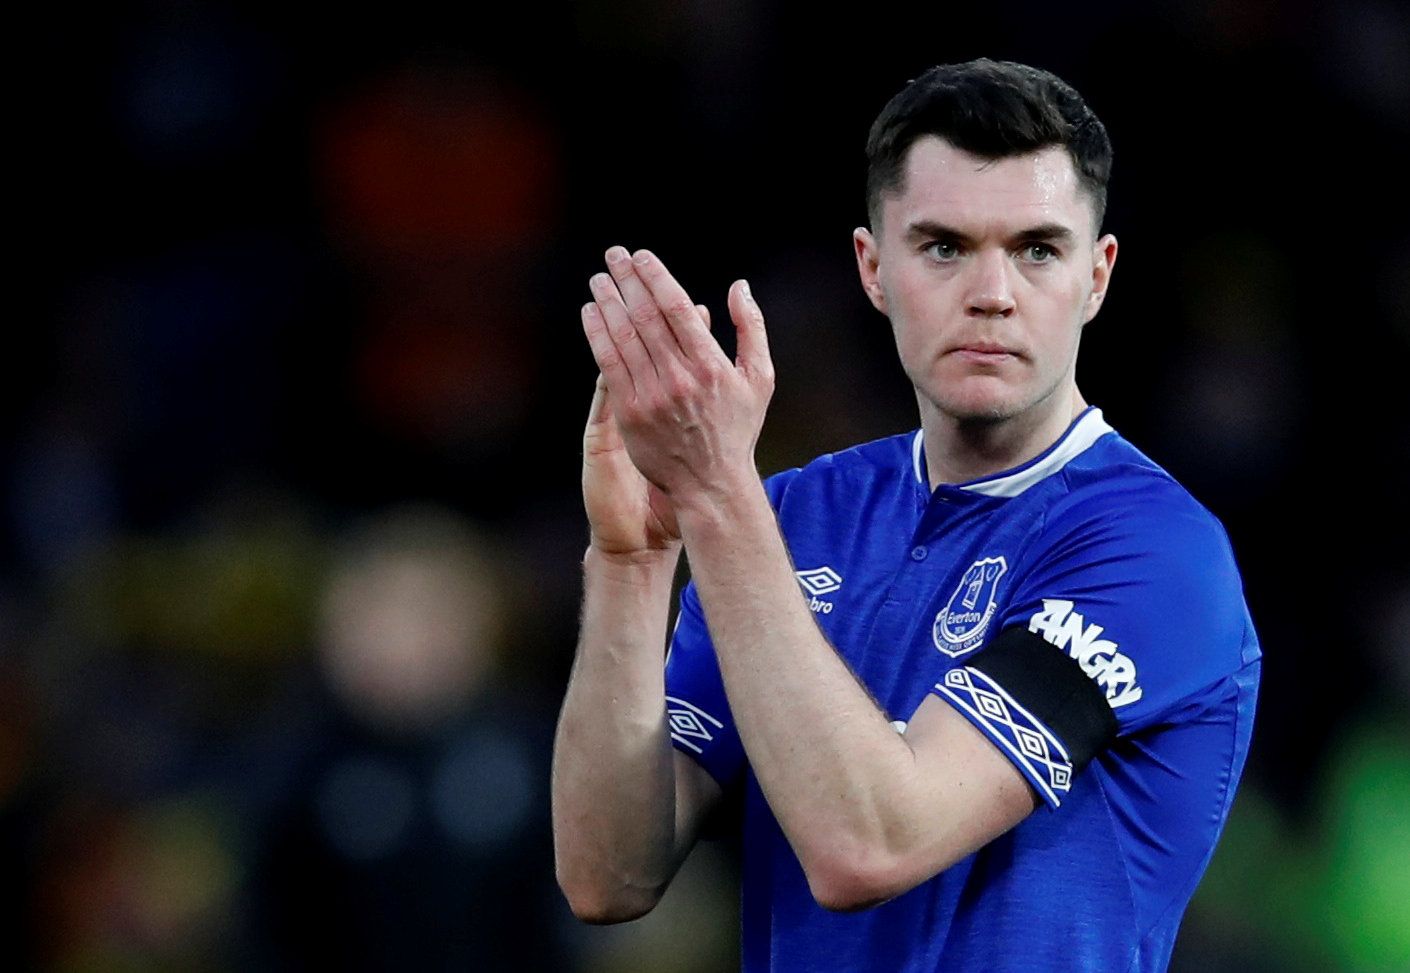 Soccer Football - Premier League - Watford v Everton - Vicarage Road, Watford, Britain - February 9, 2019  Everton's Michael Keane applauds fans after the match        REUTERS/David Klein  EDITORIAL USE ONLY. No use with unauthorized audio, video, data, fixture lists, club/league logos or 